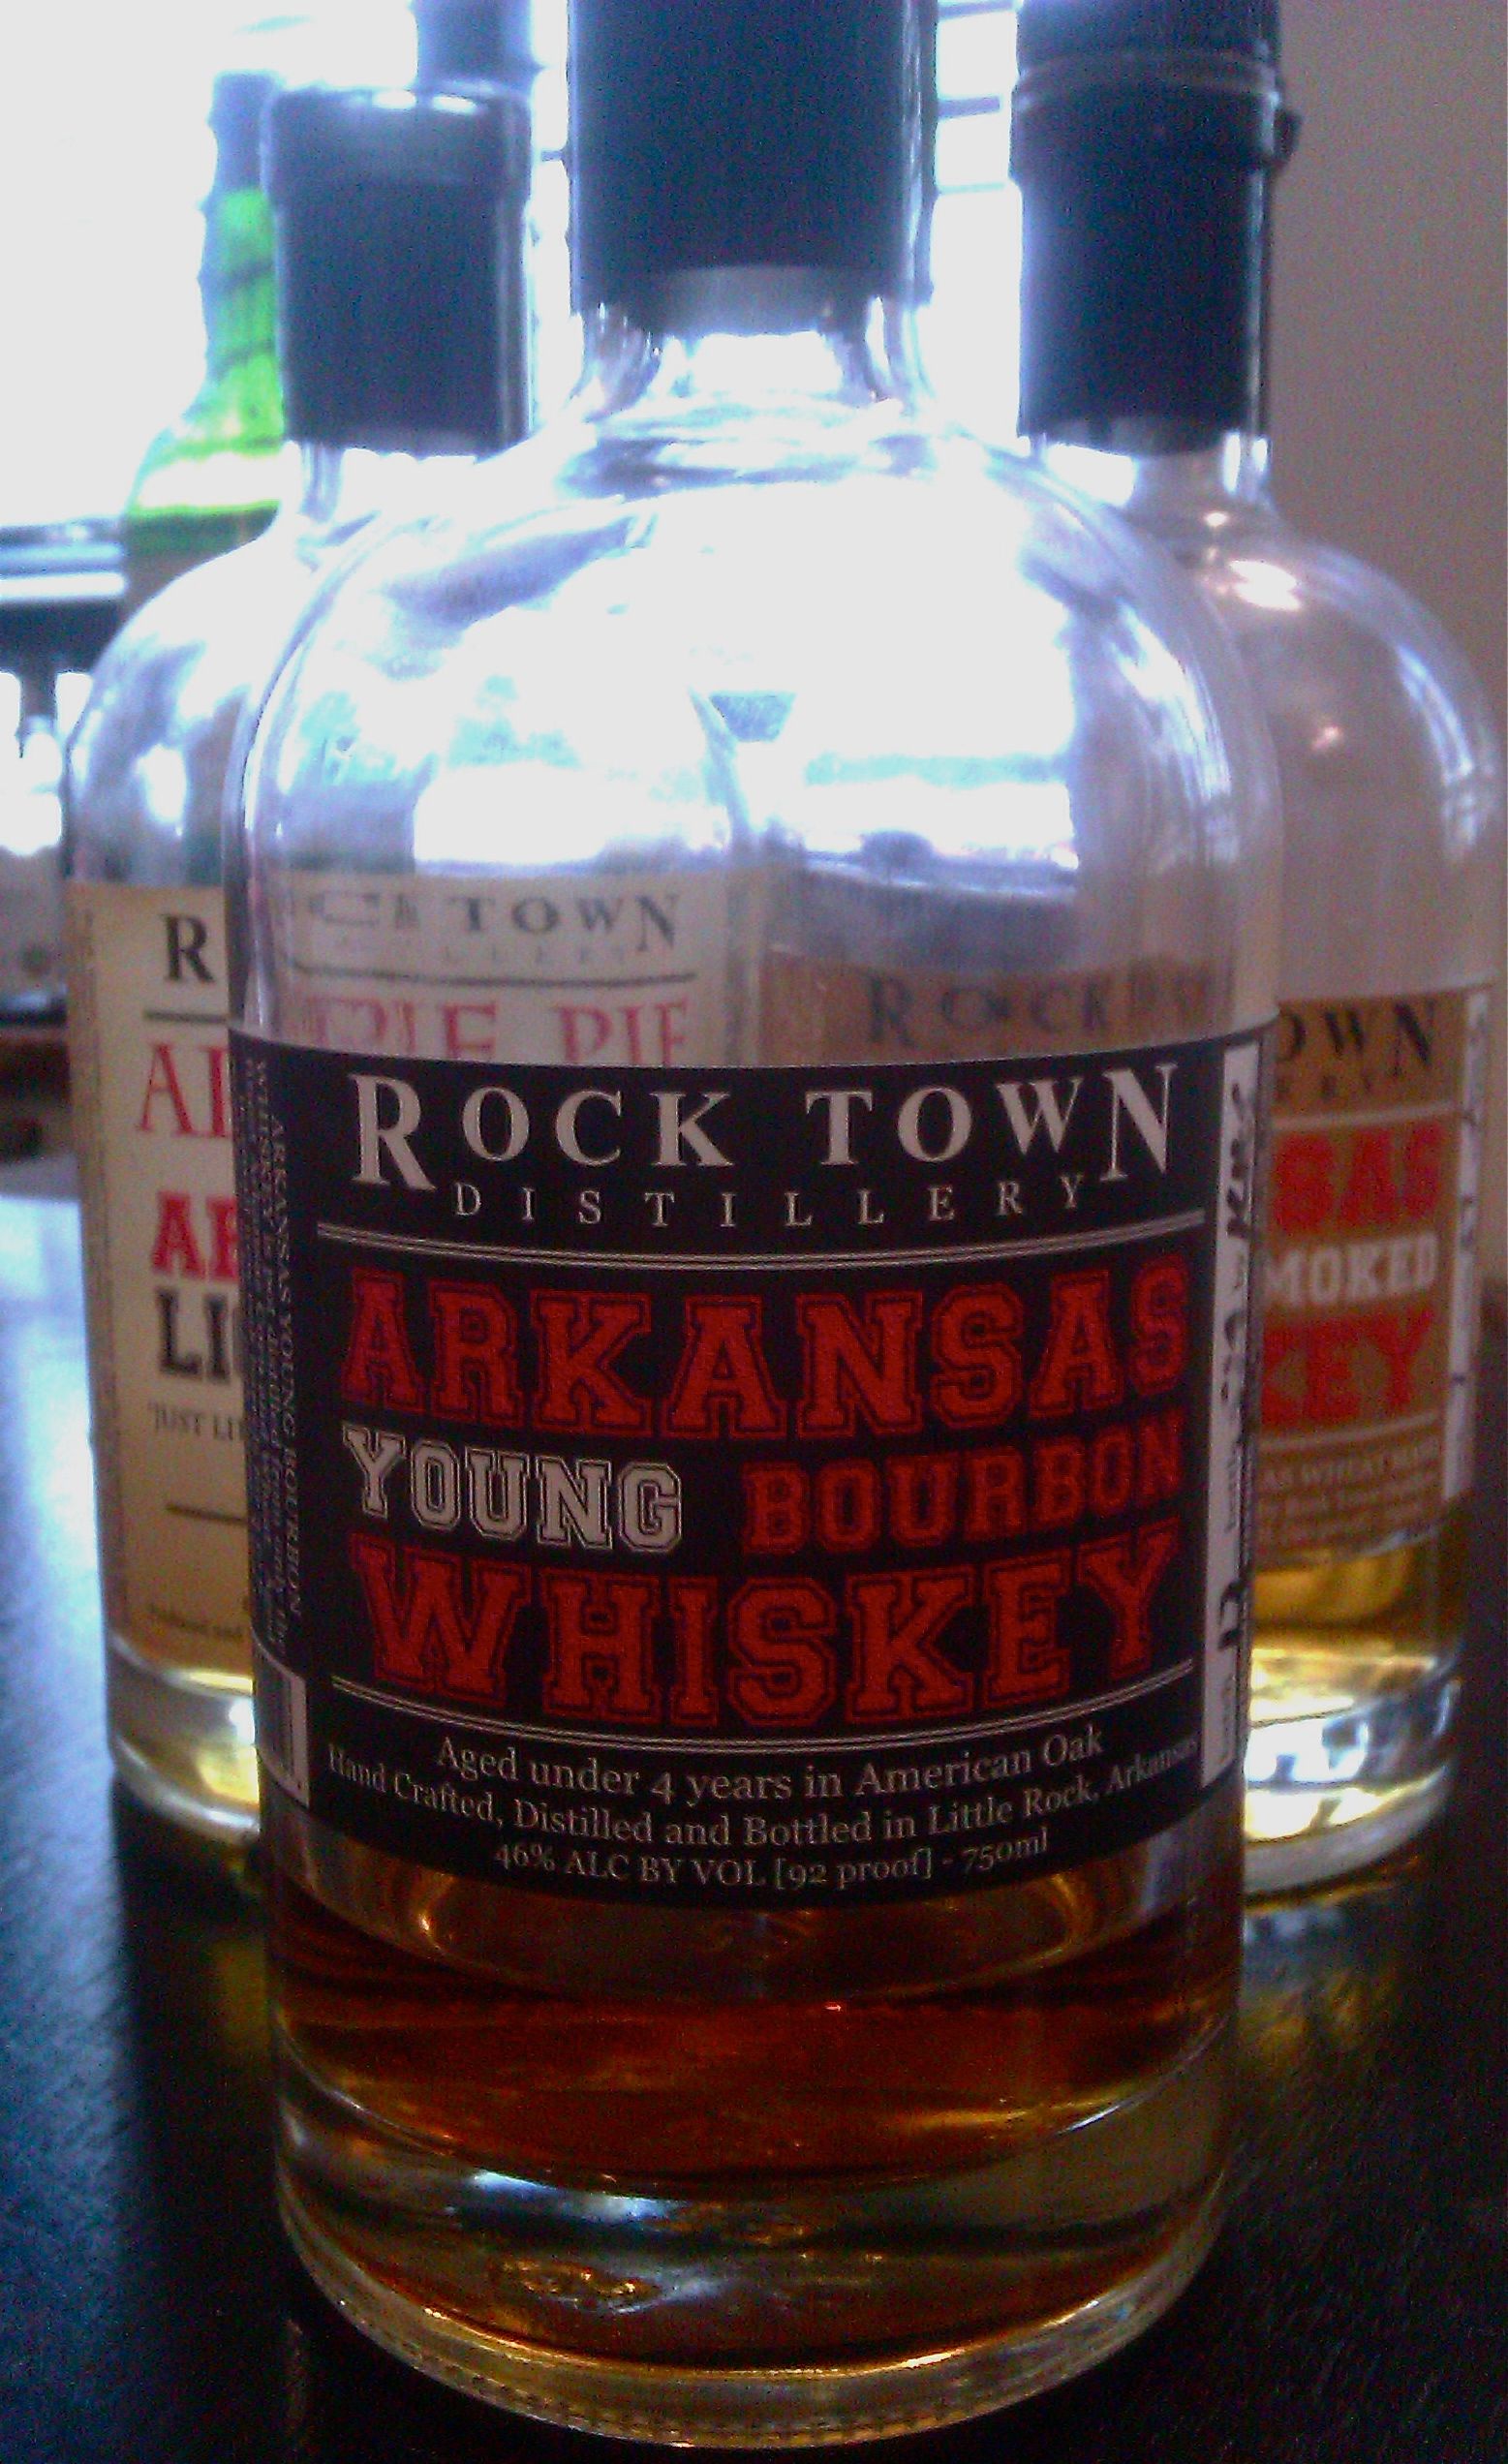 Bottle of Rock Town Arkansas Young Bourbon Whisky in front of two other bottles